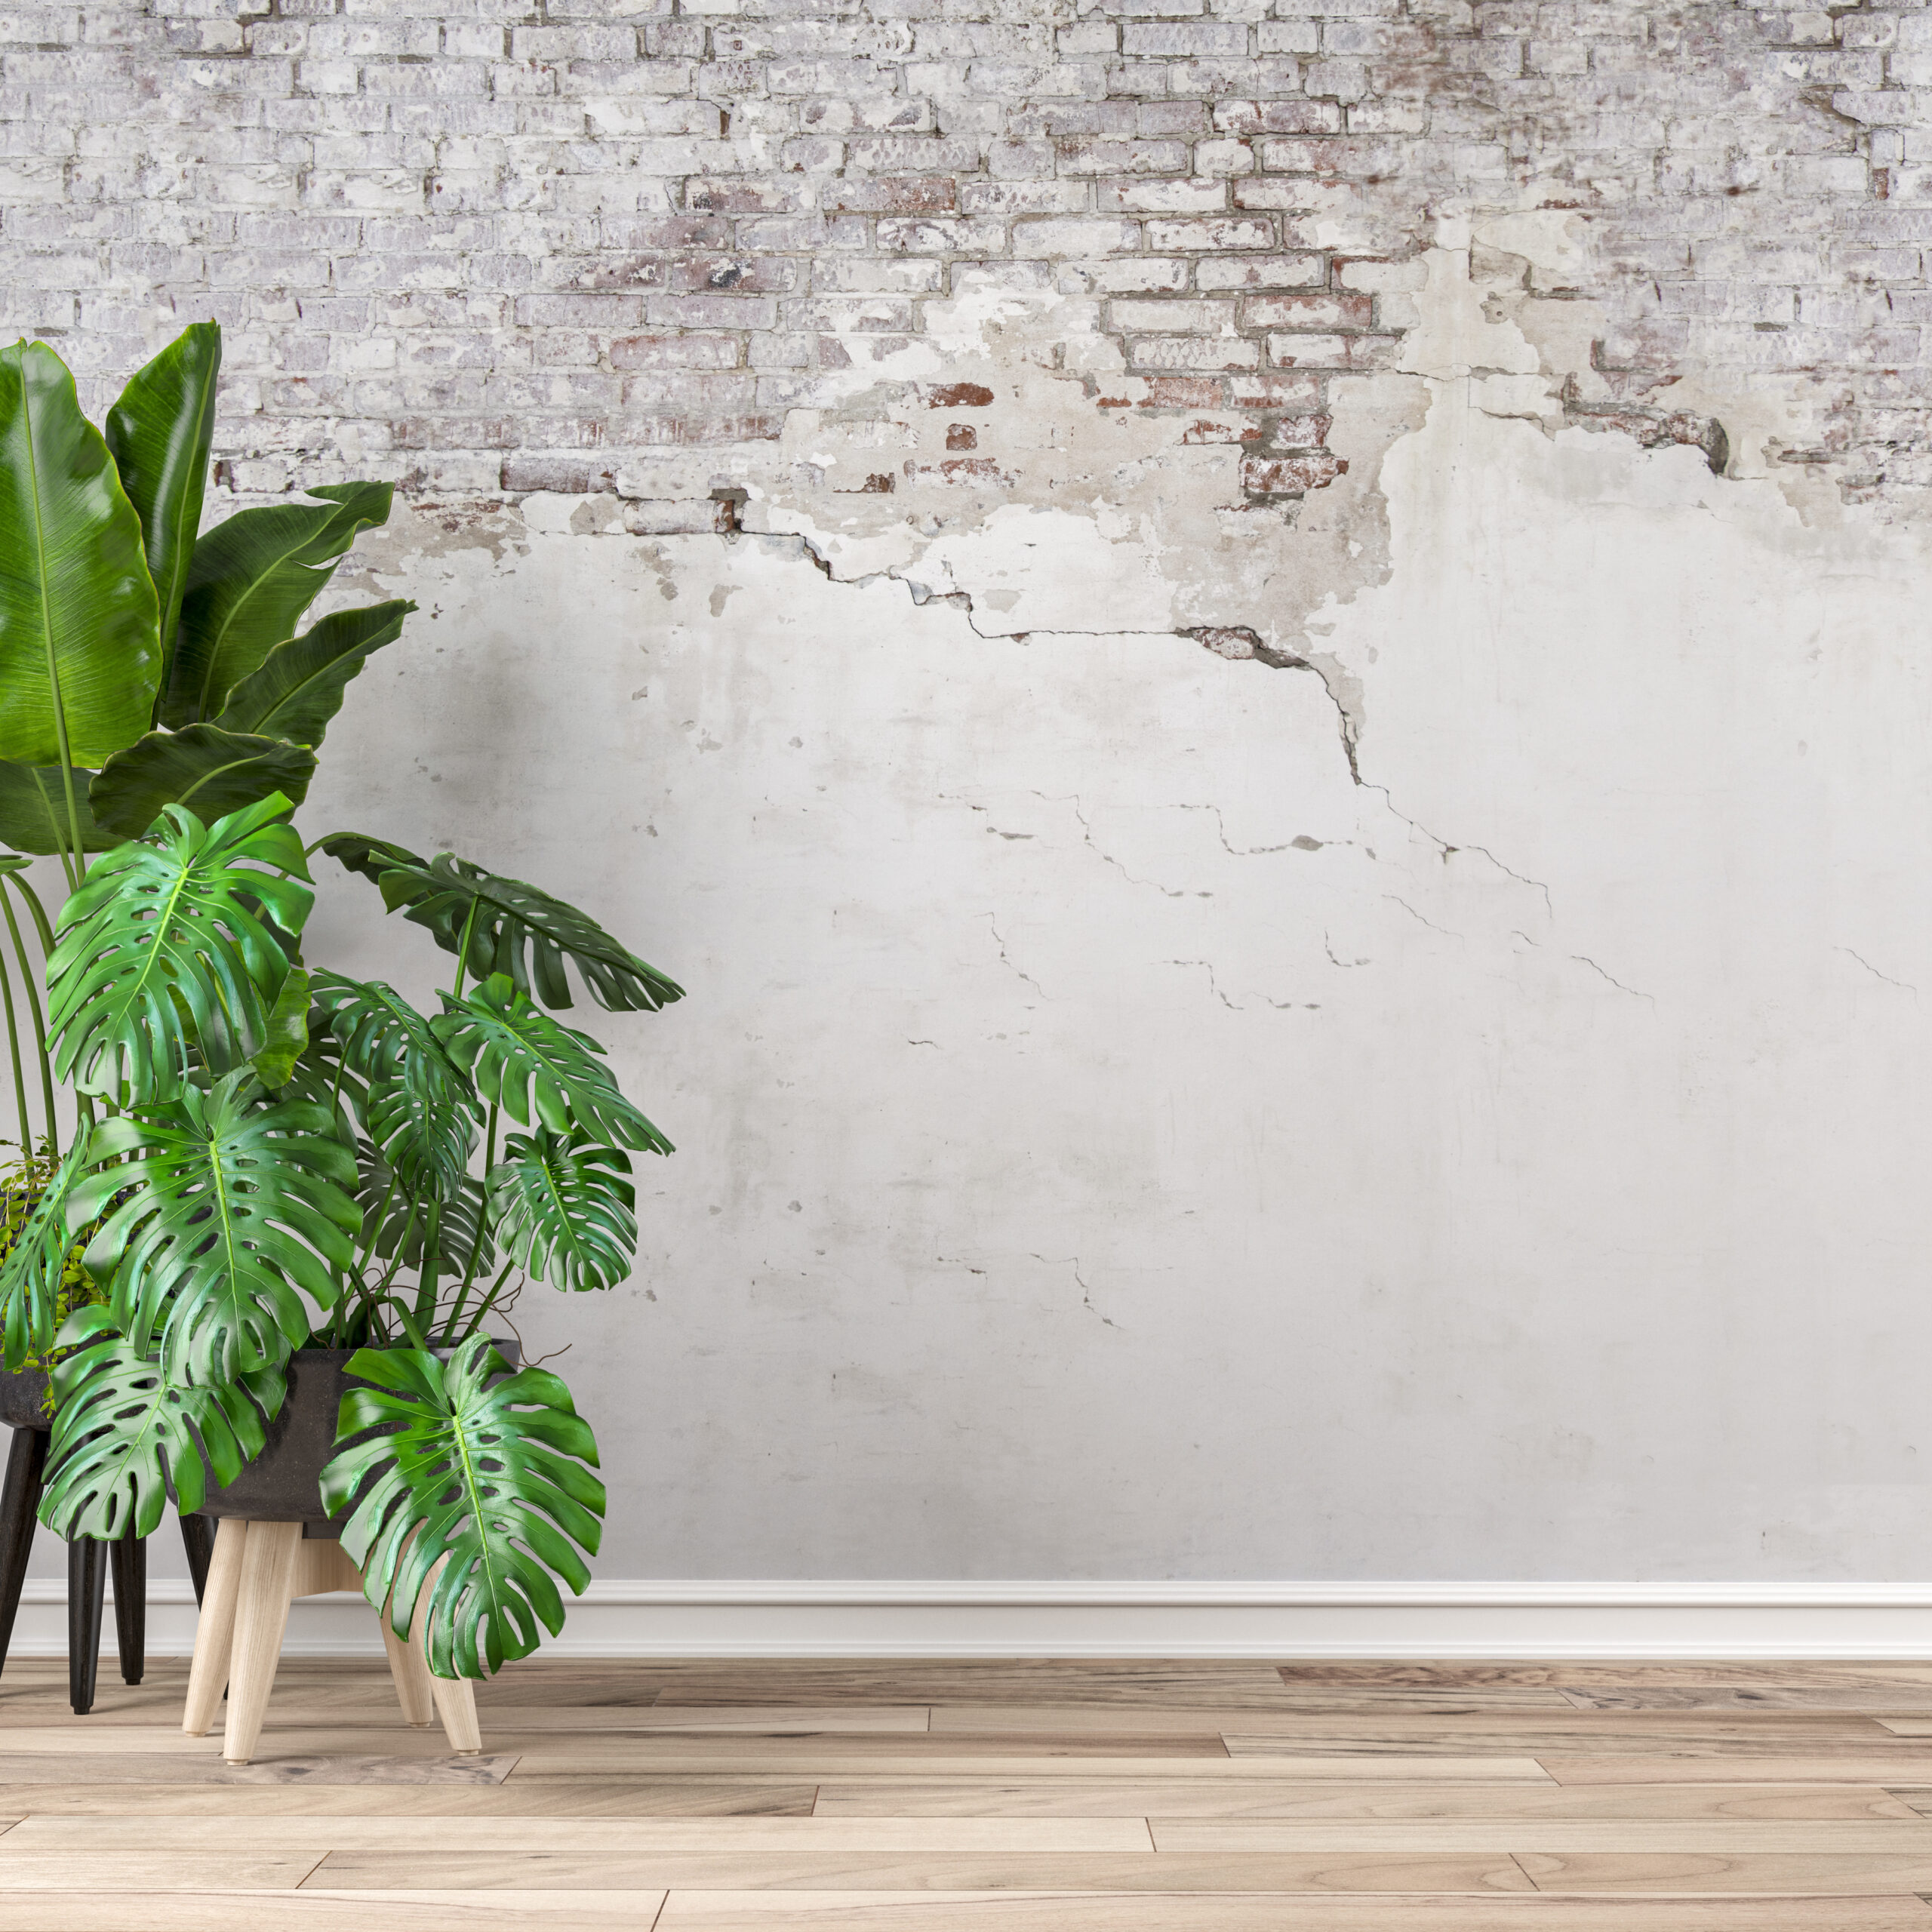 Empty ruined wall background with potted plants